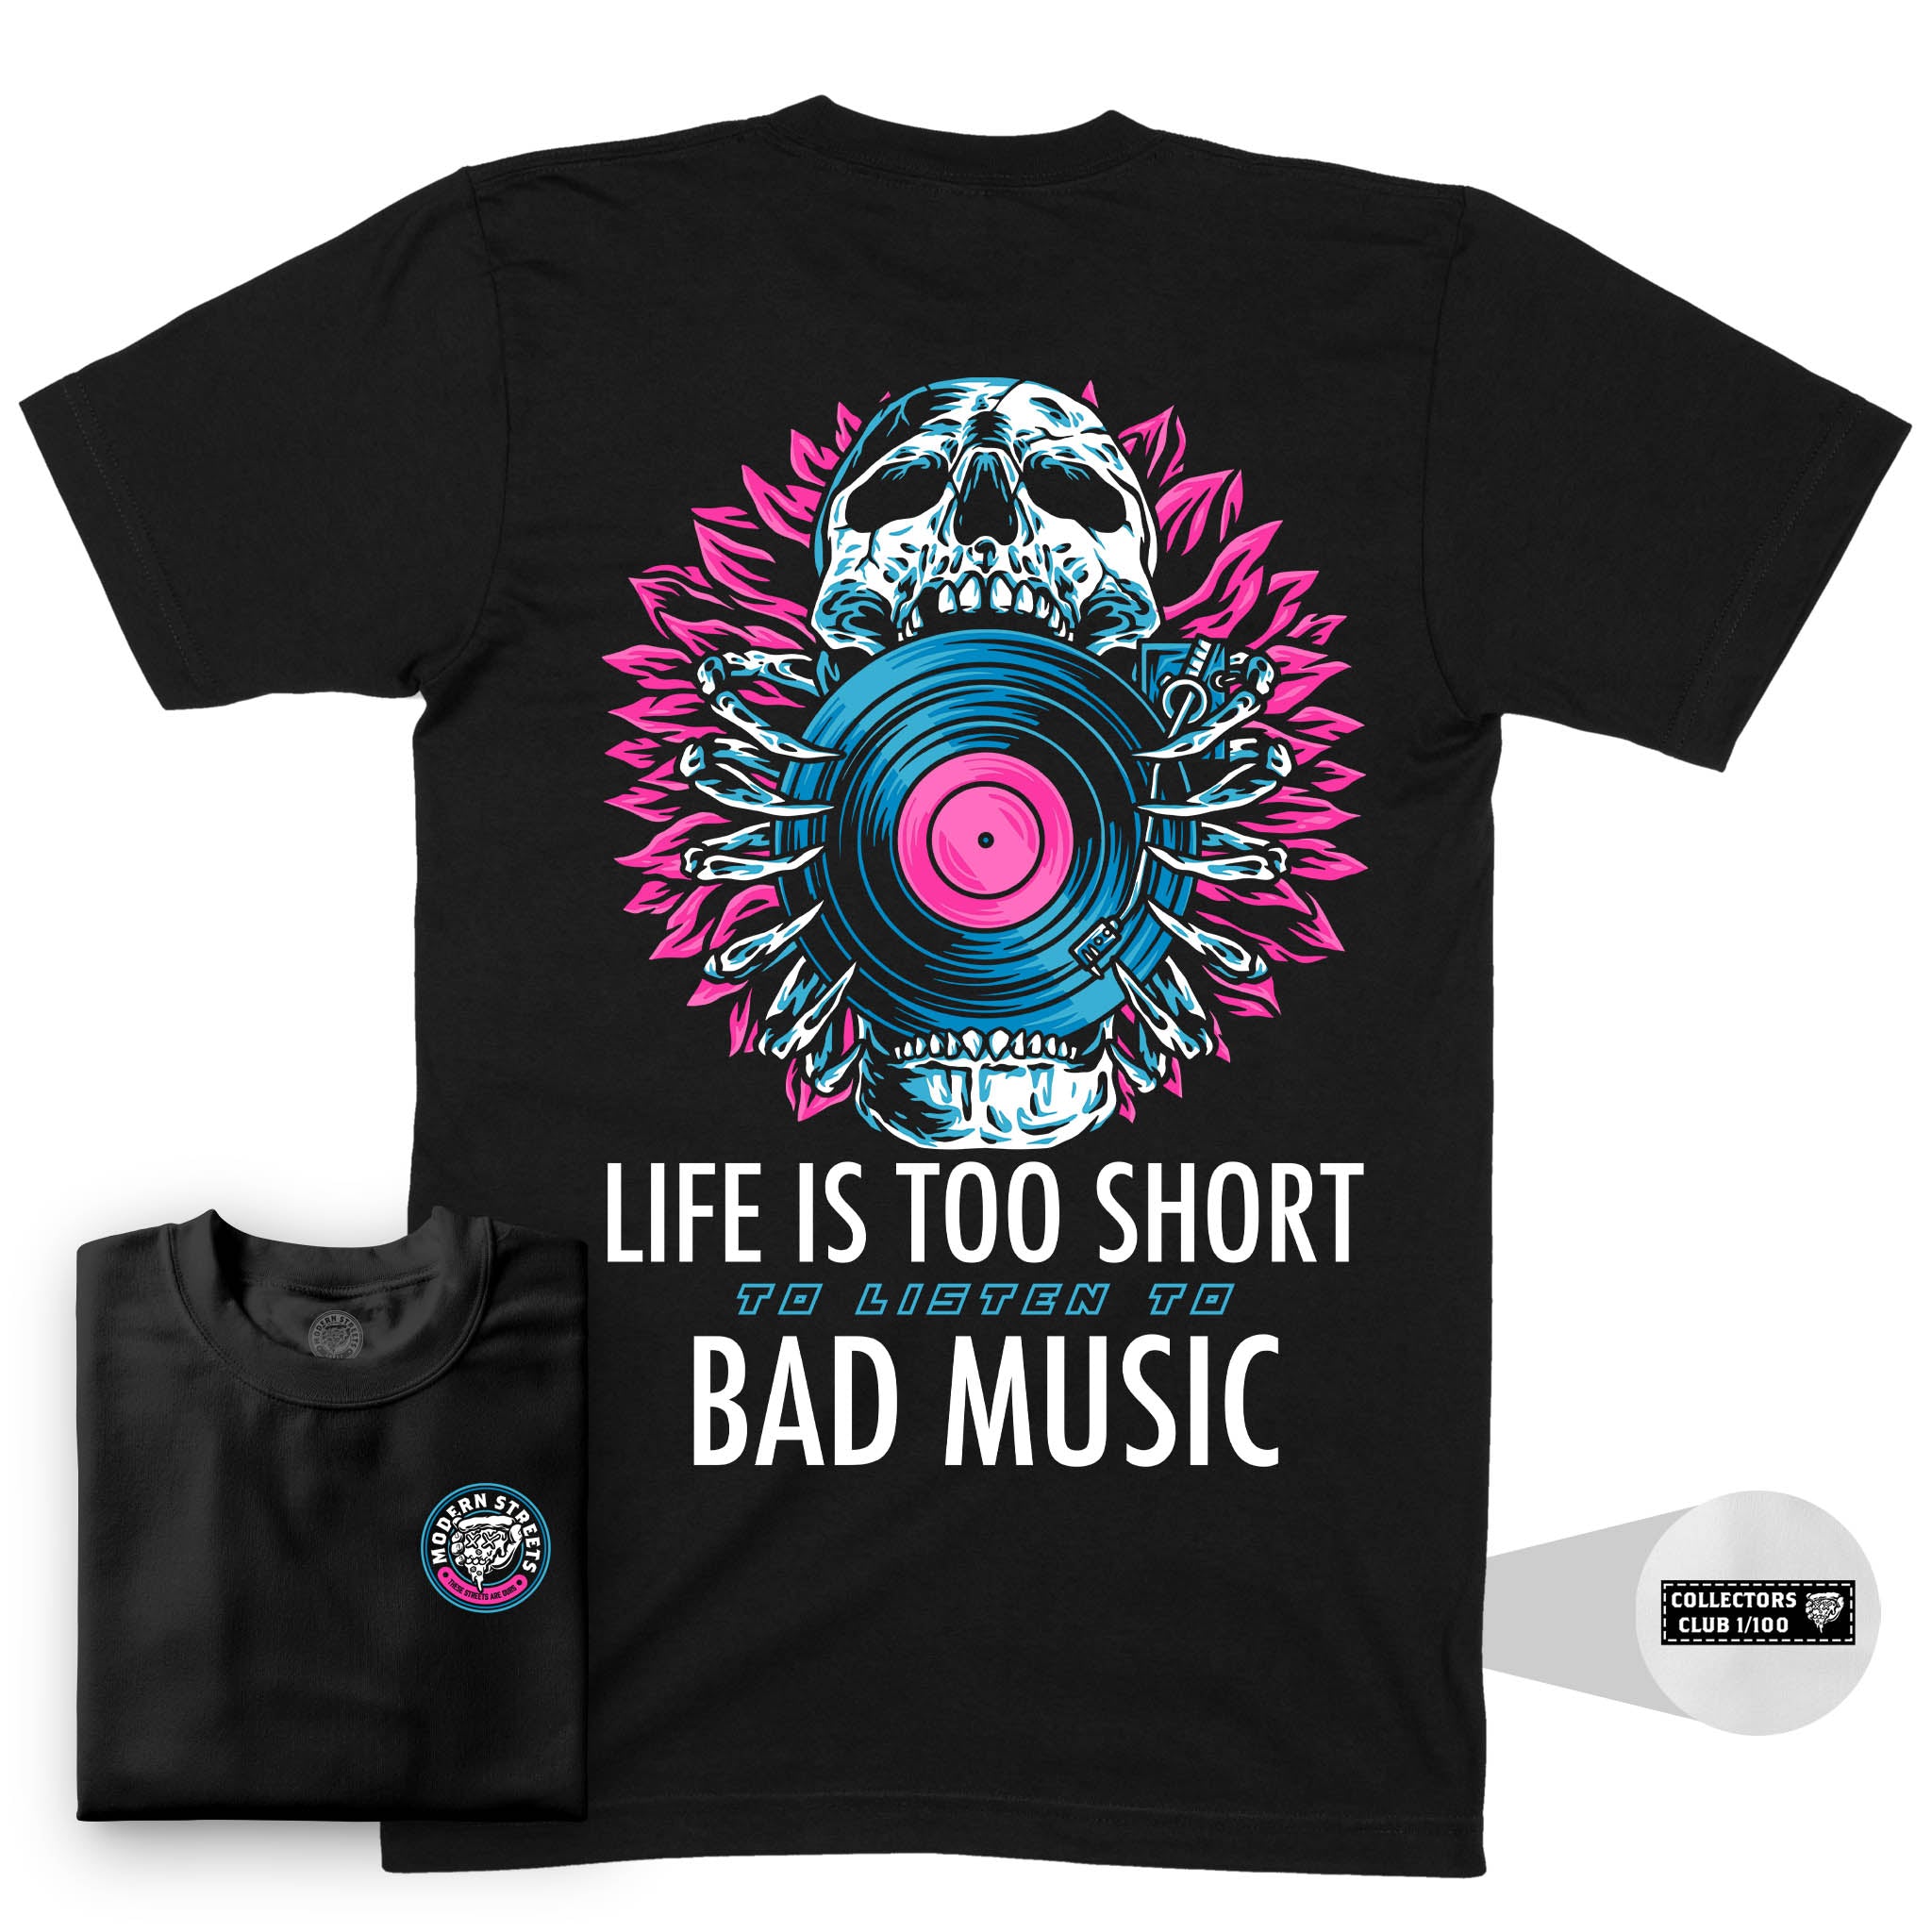 Life Is Too Short To Listen To Bad Music T-Shirt (Limited Edition)